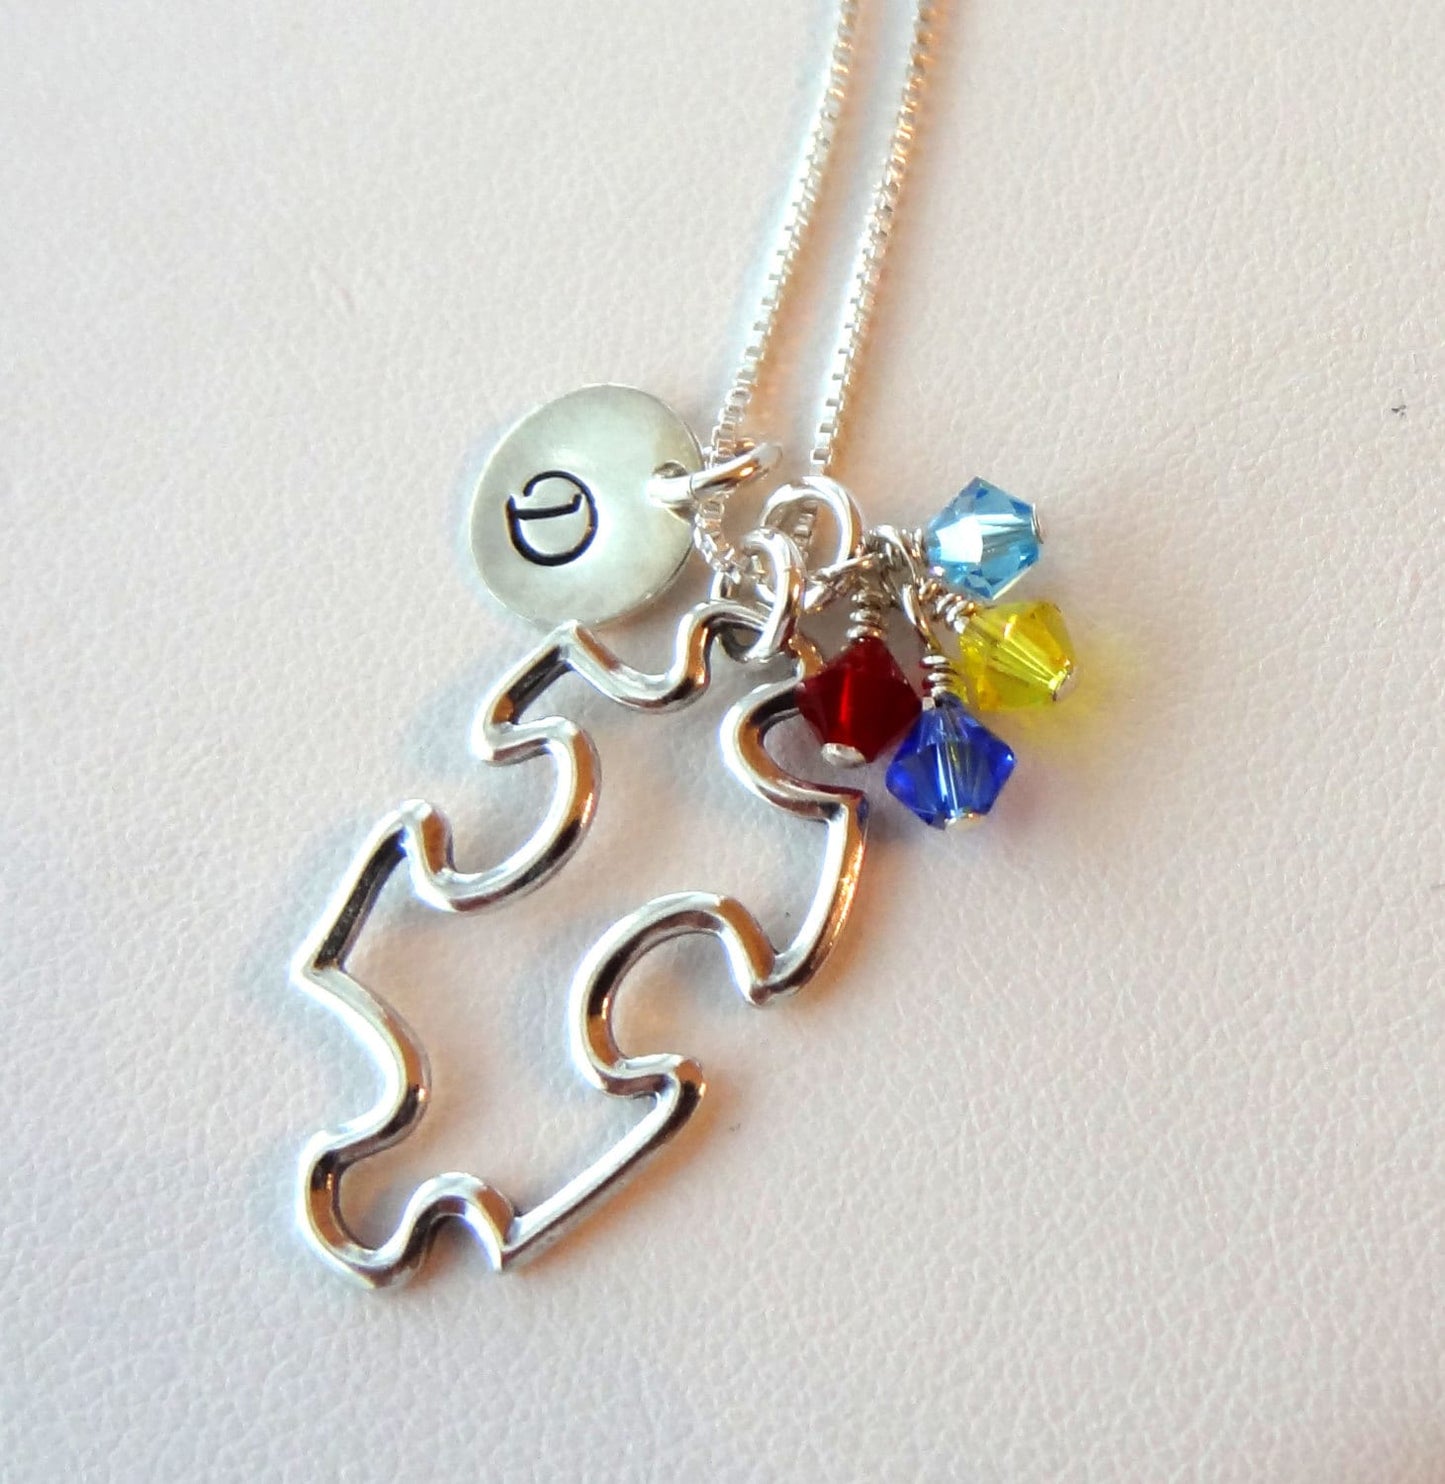 Sterling Silver Ribbon Puzzle Necklace, Sterling Silver Autism Awareness Necklace, Autism Necklace, Puzzle Necklace, Asperger Necklace